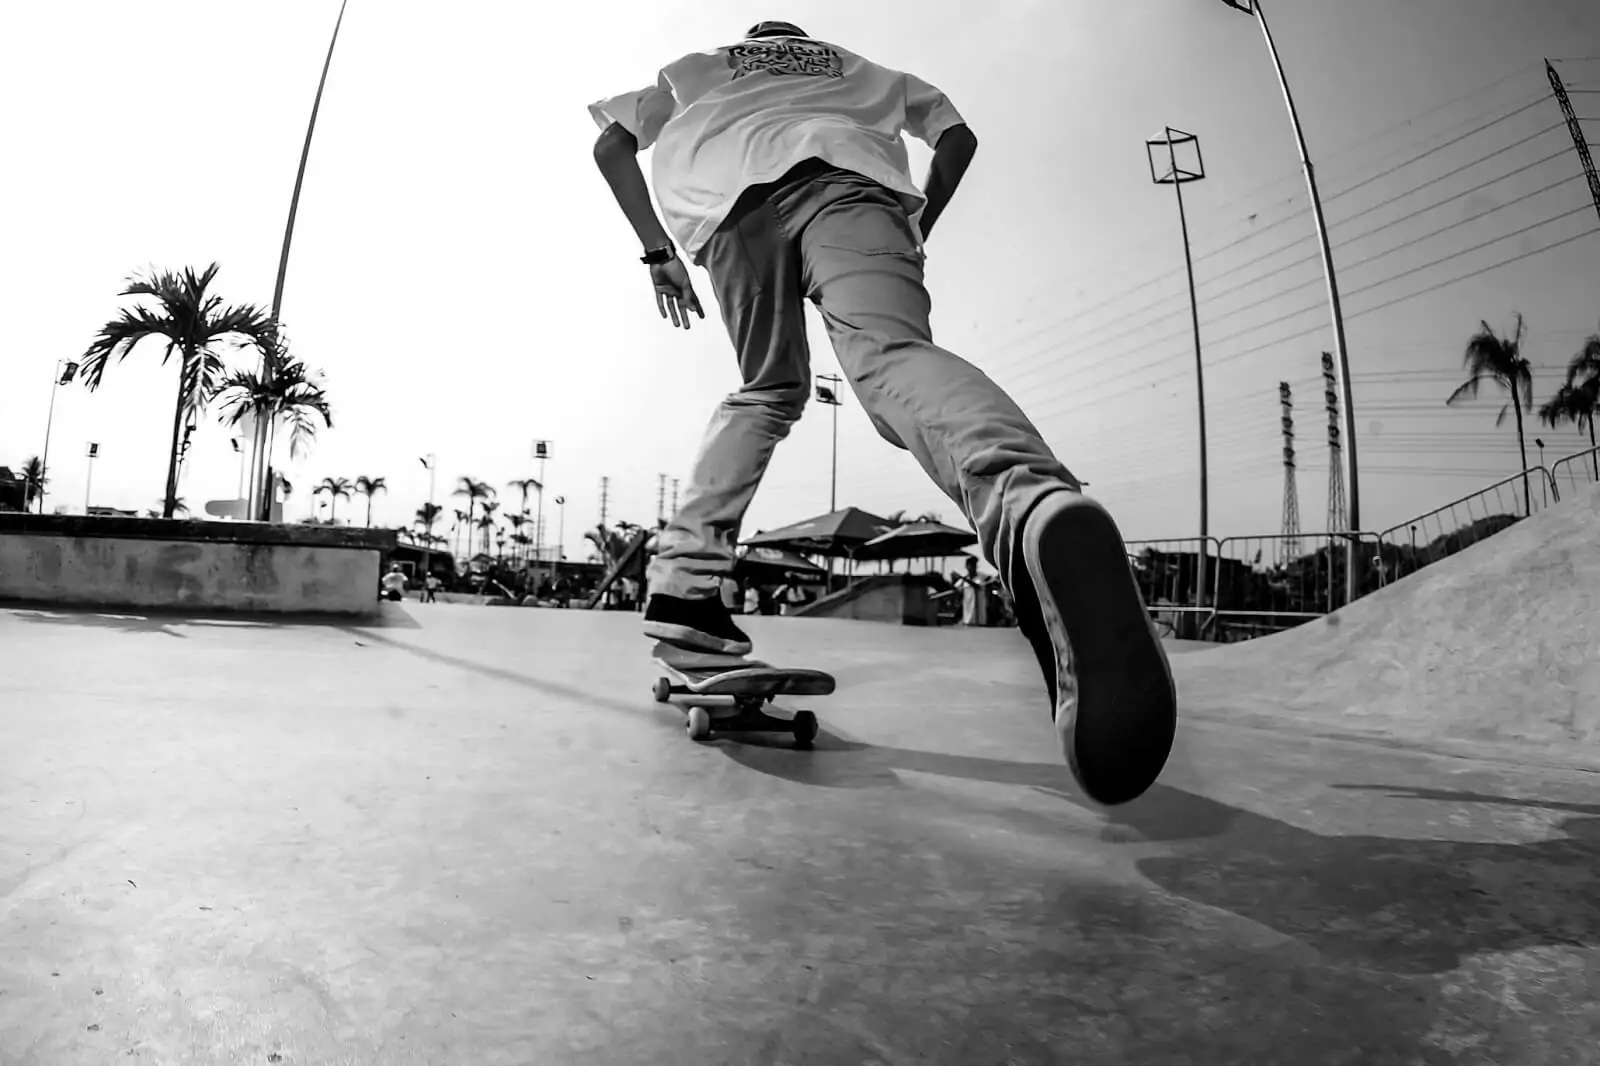 Great Sports Pictures - A Skater Amidst the Palm Trees - Pablo Vaz